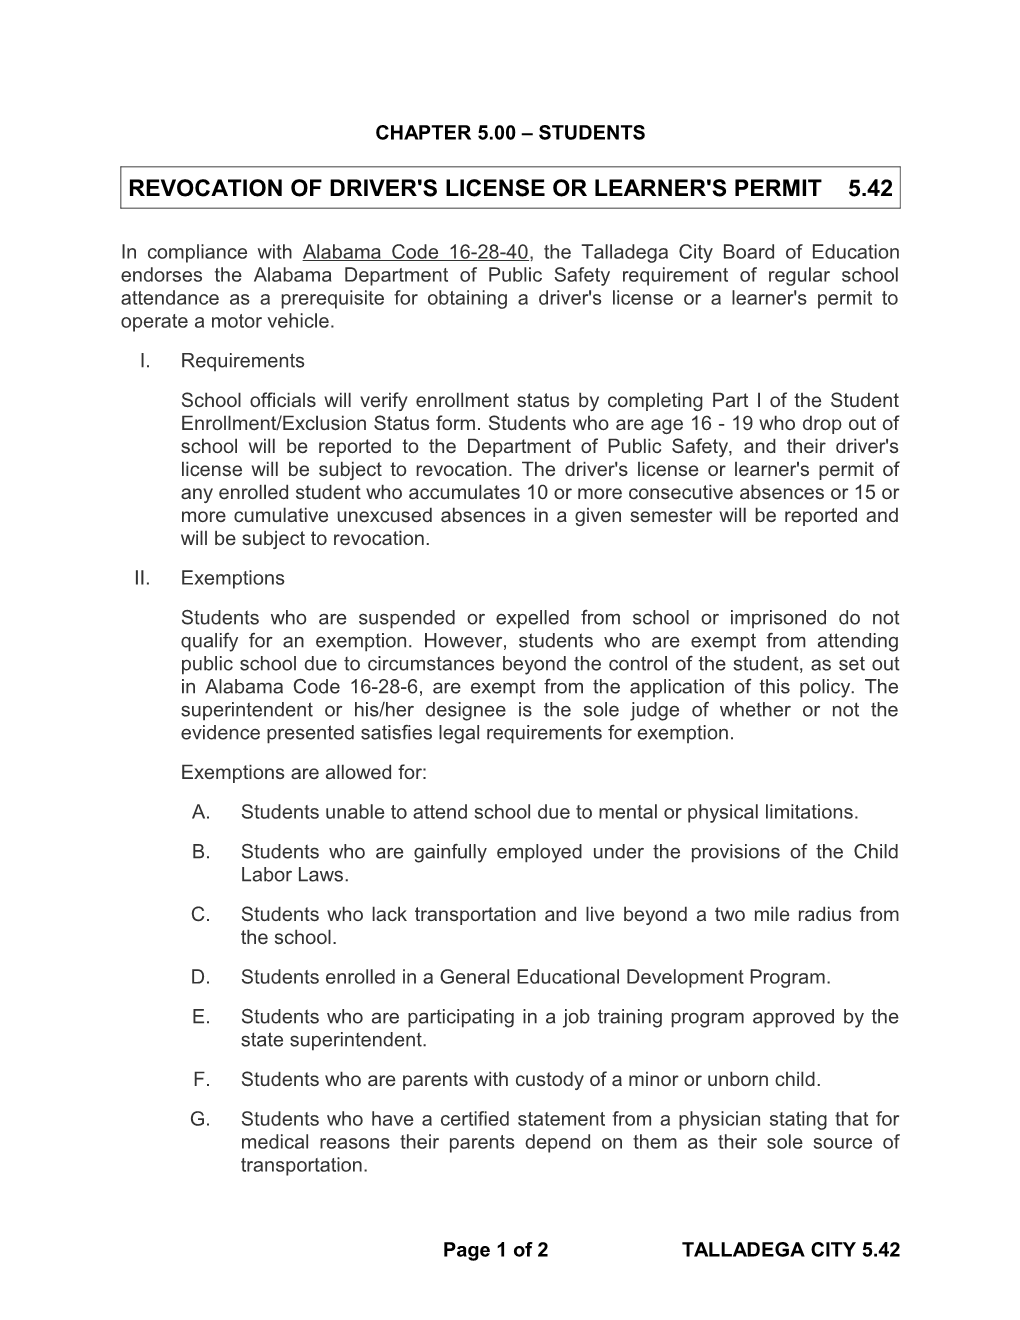 Revocation of Driver's License Or Learner's Permit